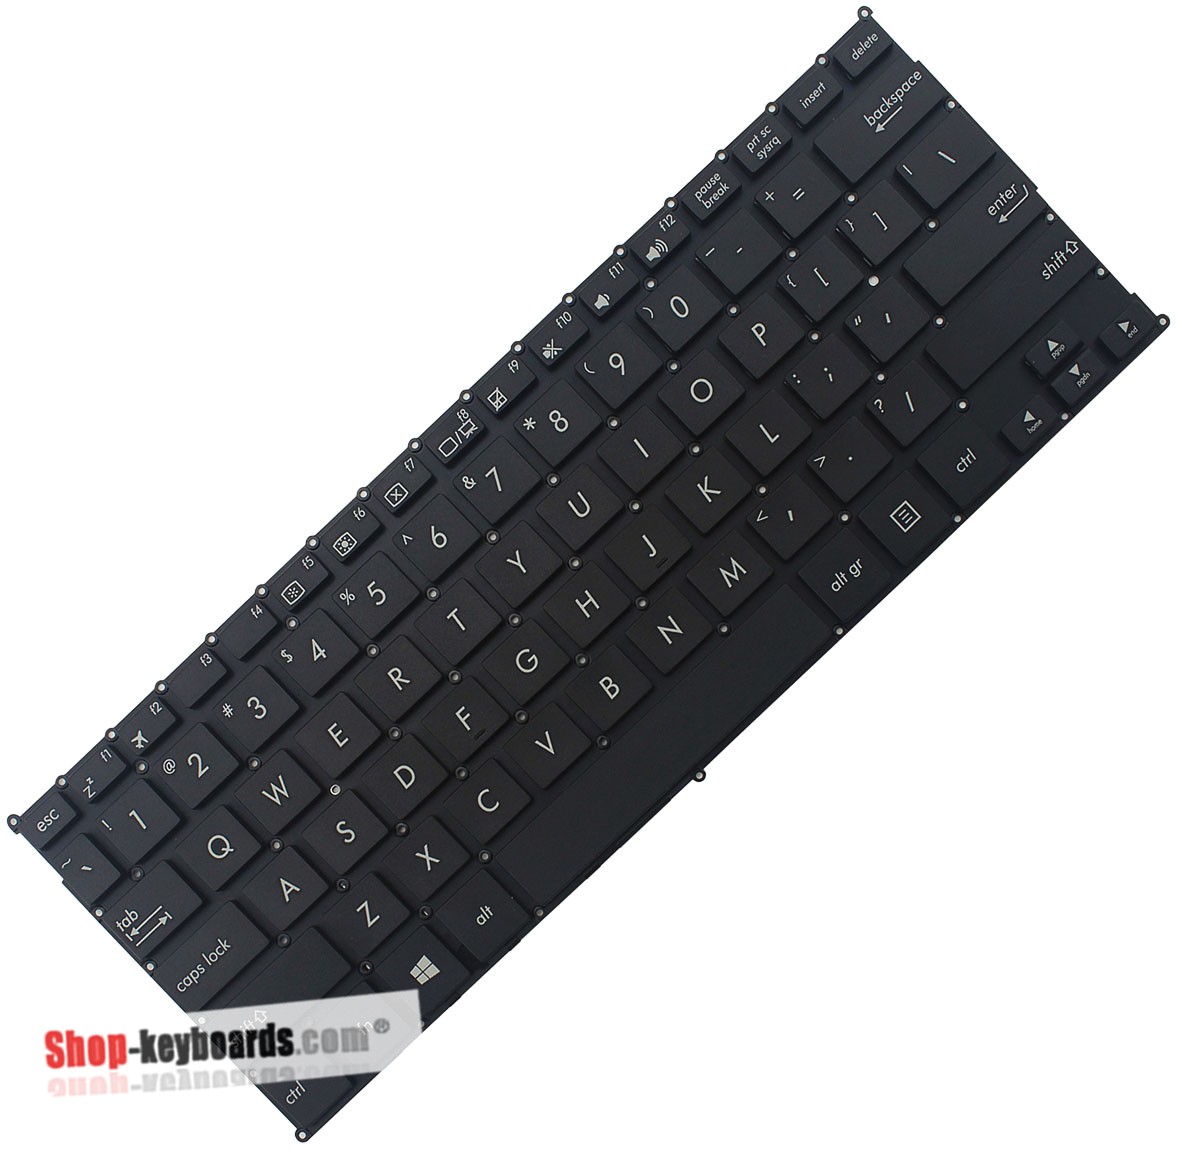 Asus 0KNL0-1123ND00 Keyboard replacement